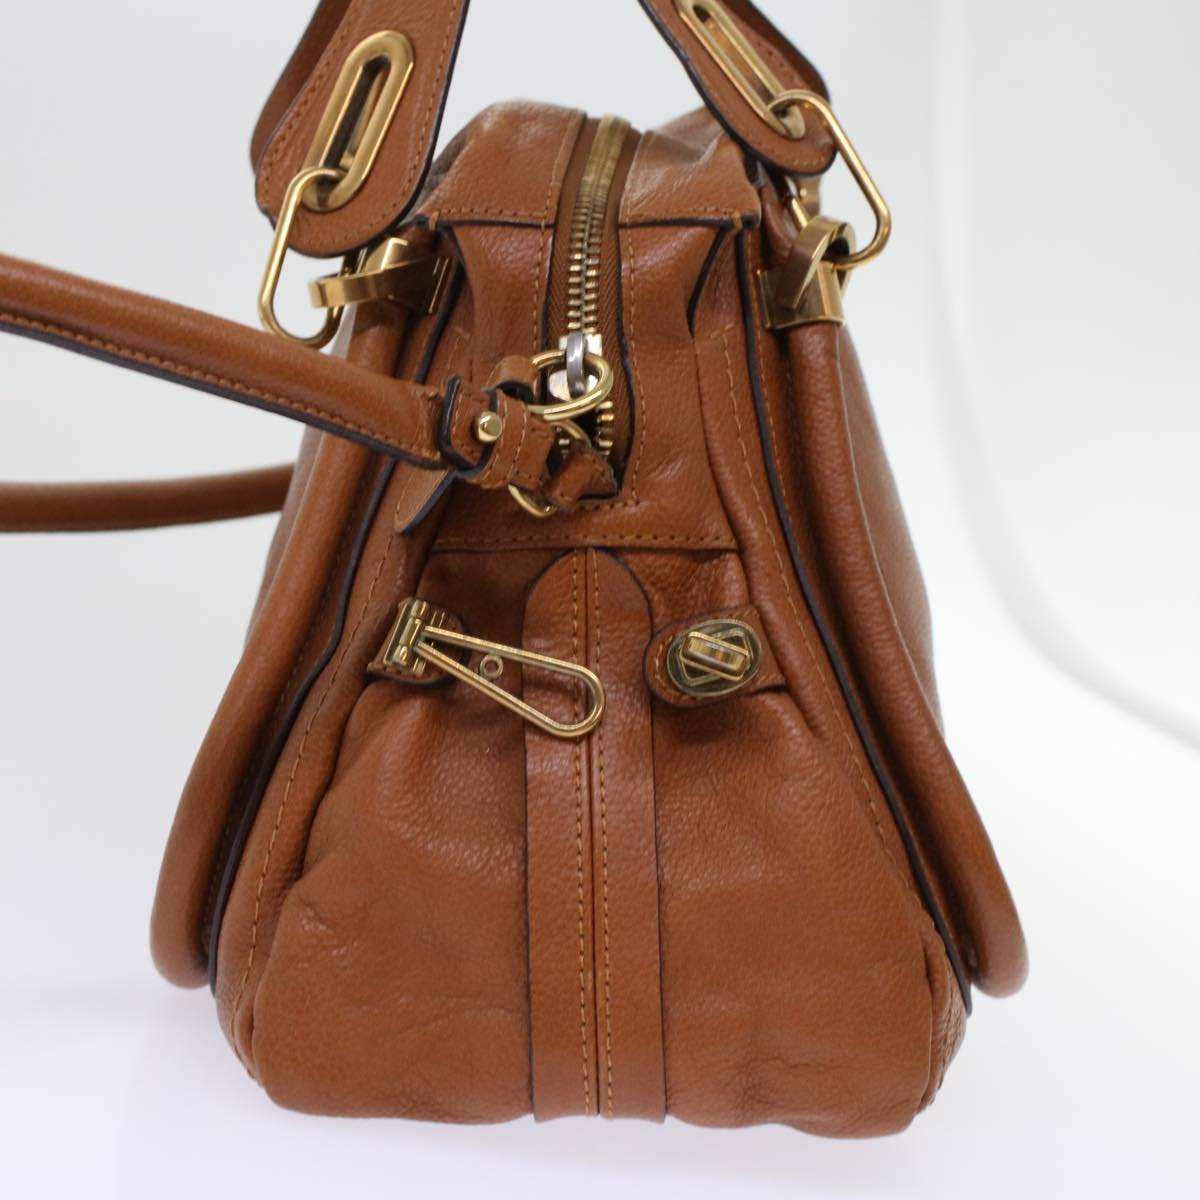 Chloe Paraty Shoulder Bag Leather 2way Brown Auth am4763